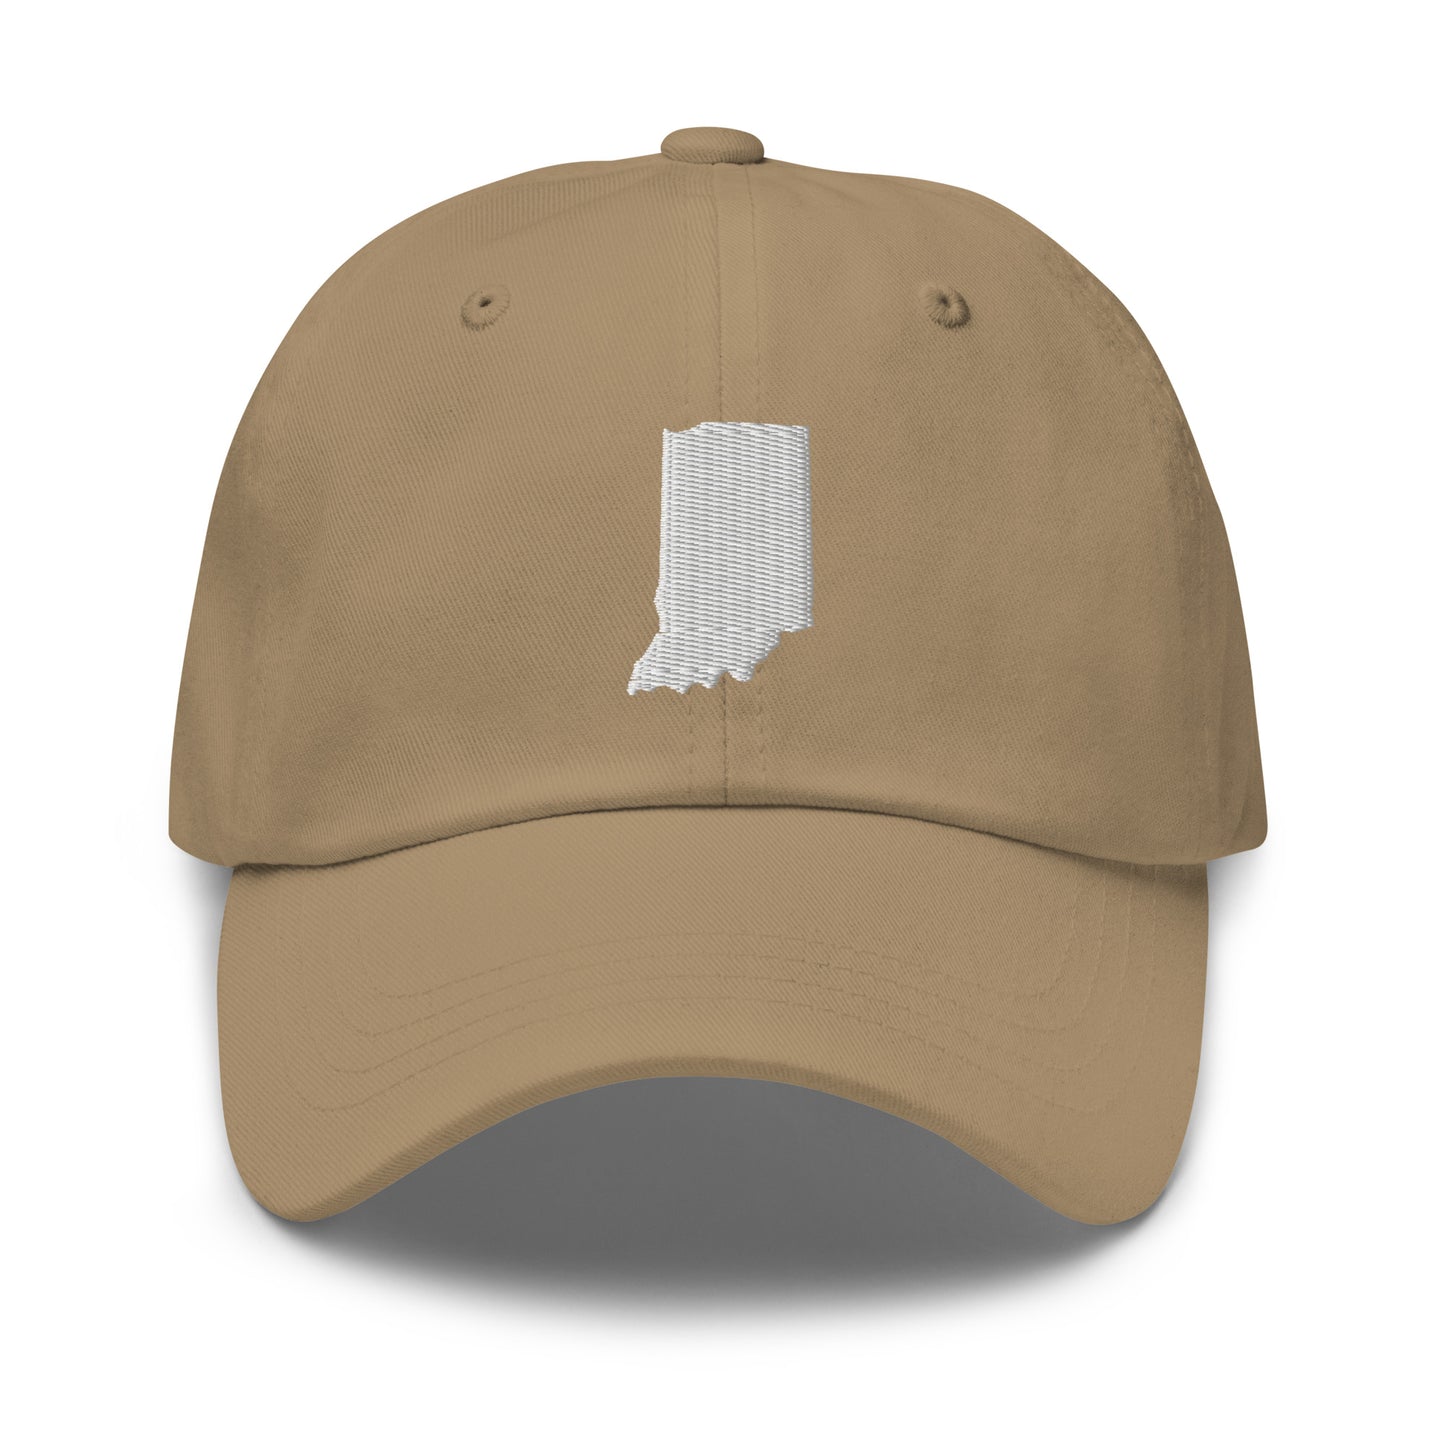 Indiana State Silhouette Dad Hat